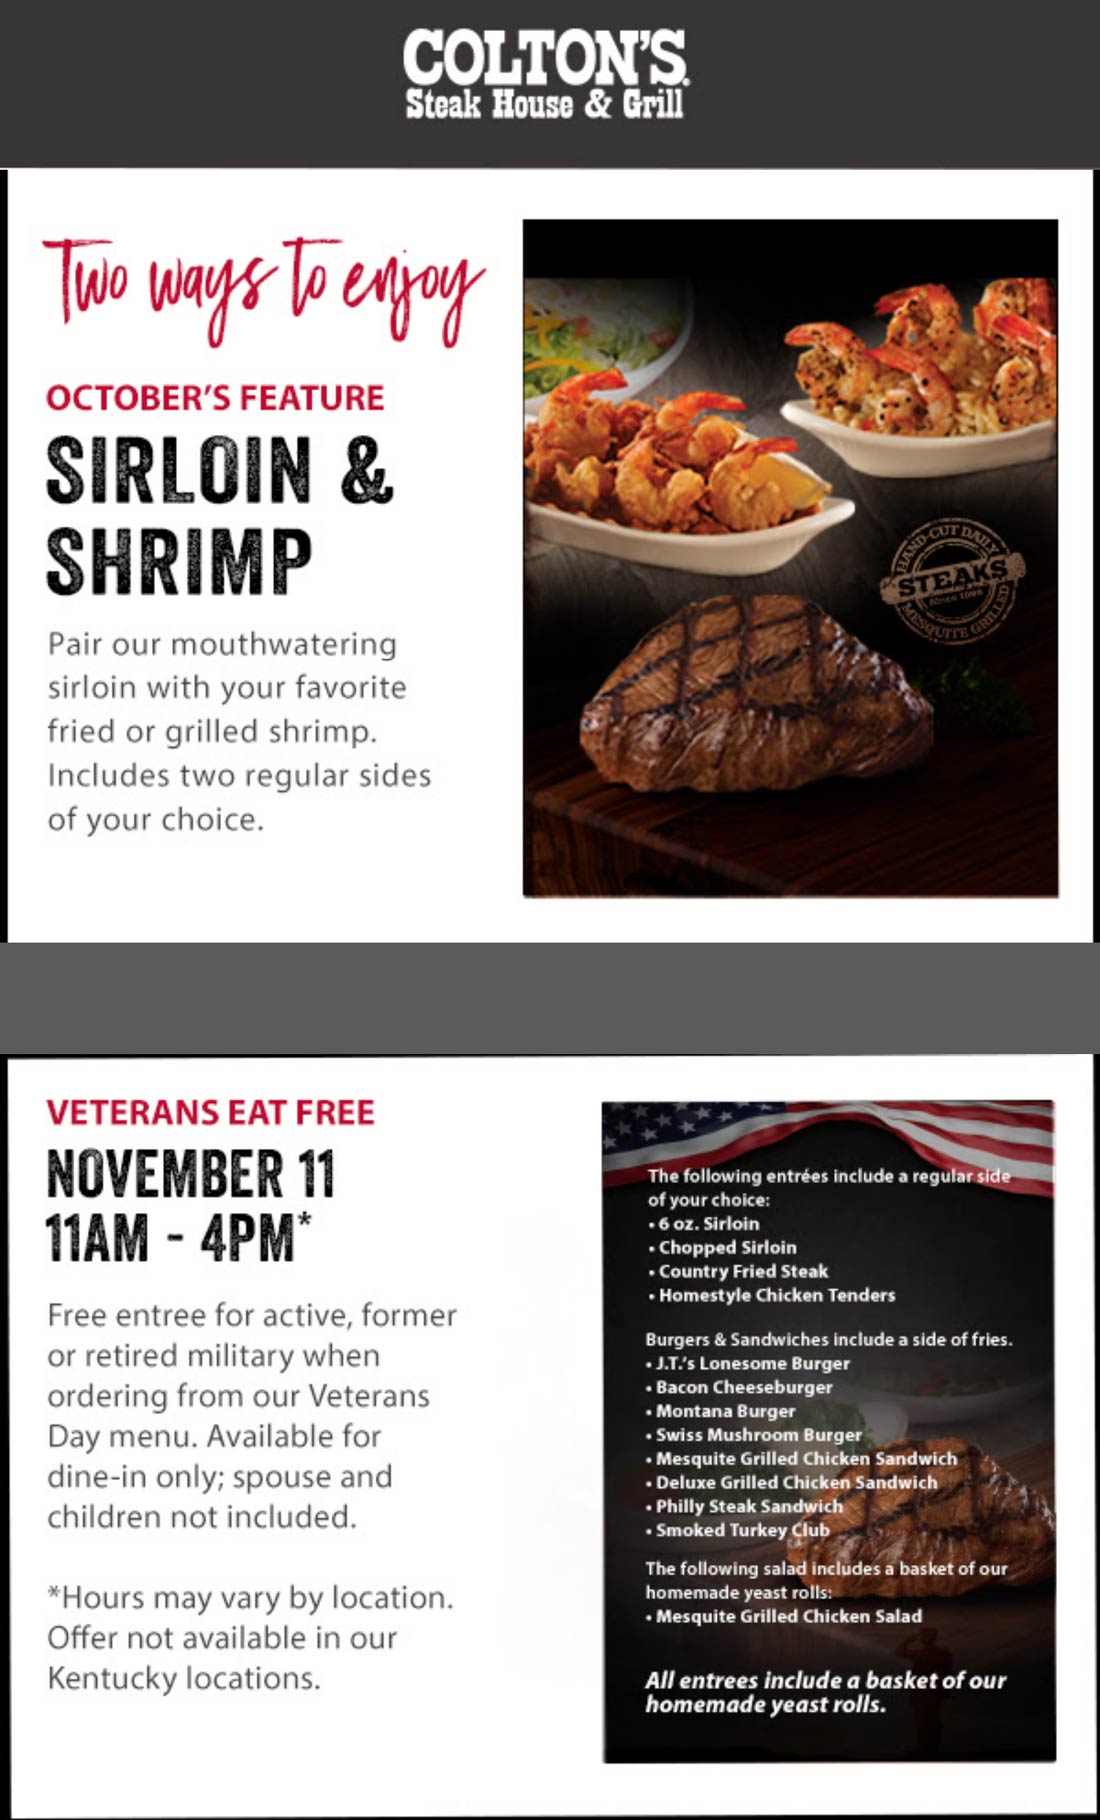 Coltons restaurants Coupon  Veterans eat free Wednesday at Coltons steak house & grill #coltons 